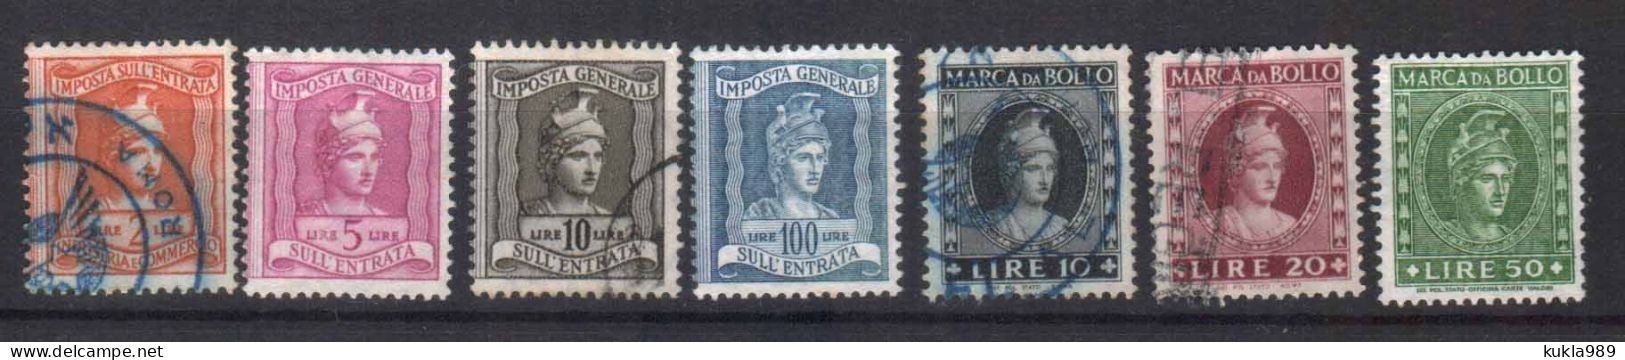 ITALY , C.1950s FISCAL REVENUE TAX 7 STAMPS - Fiscale Zegels